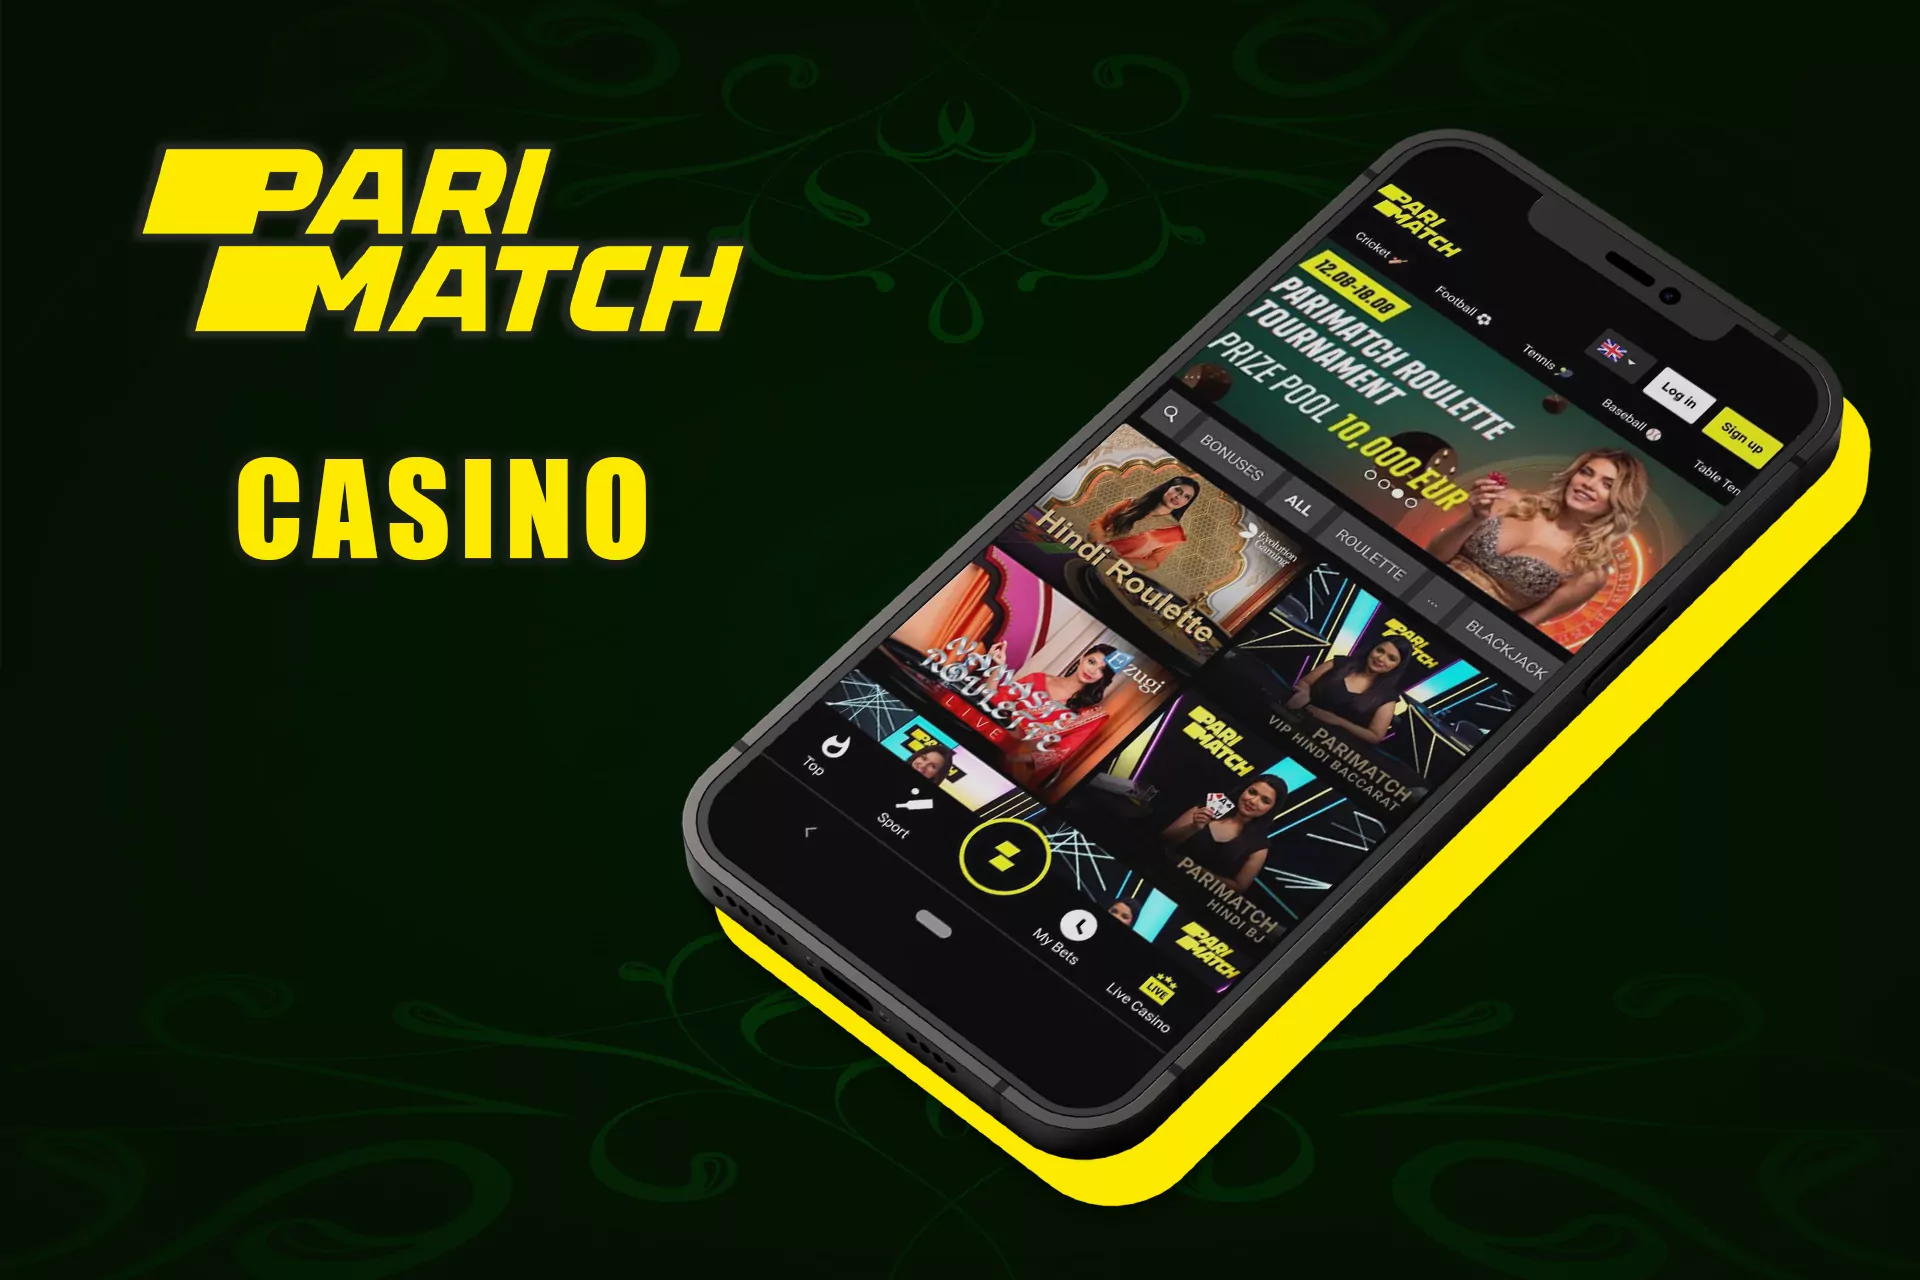 If you are a fan of casino games visit the special section.